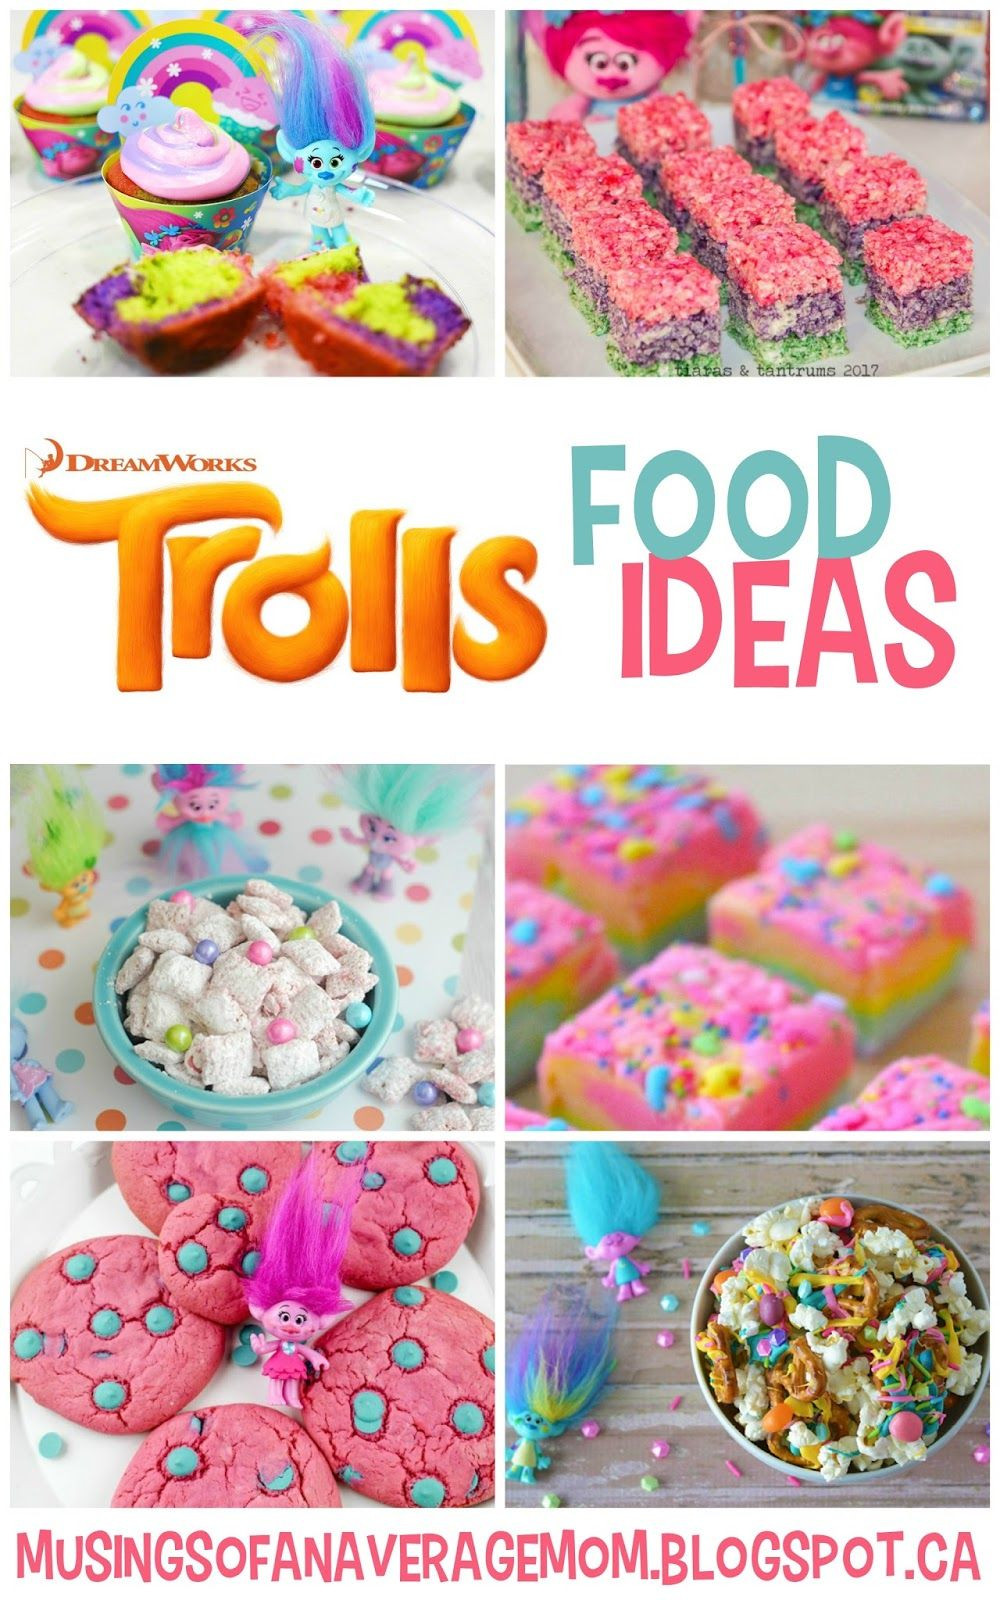 Trolls Food Party Ideas
 Everything You Need for a Trolls Party